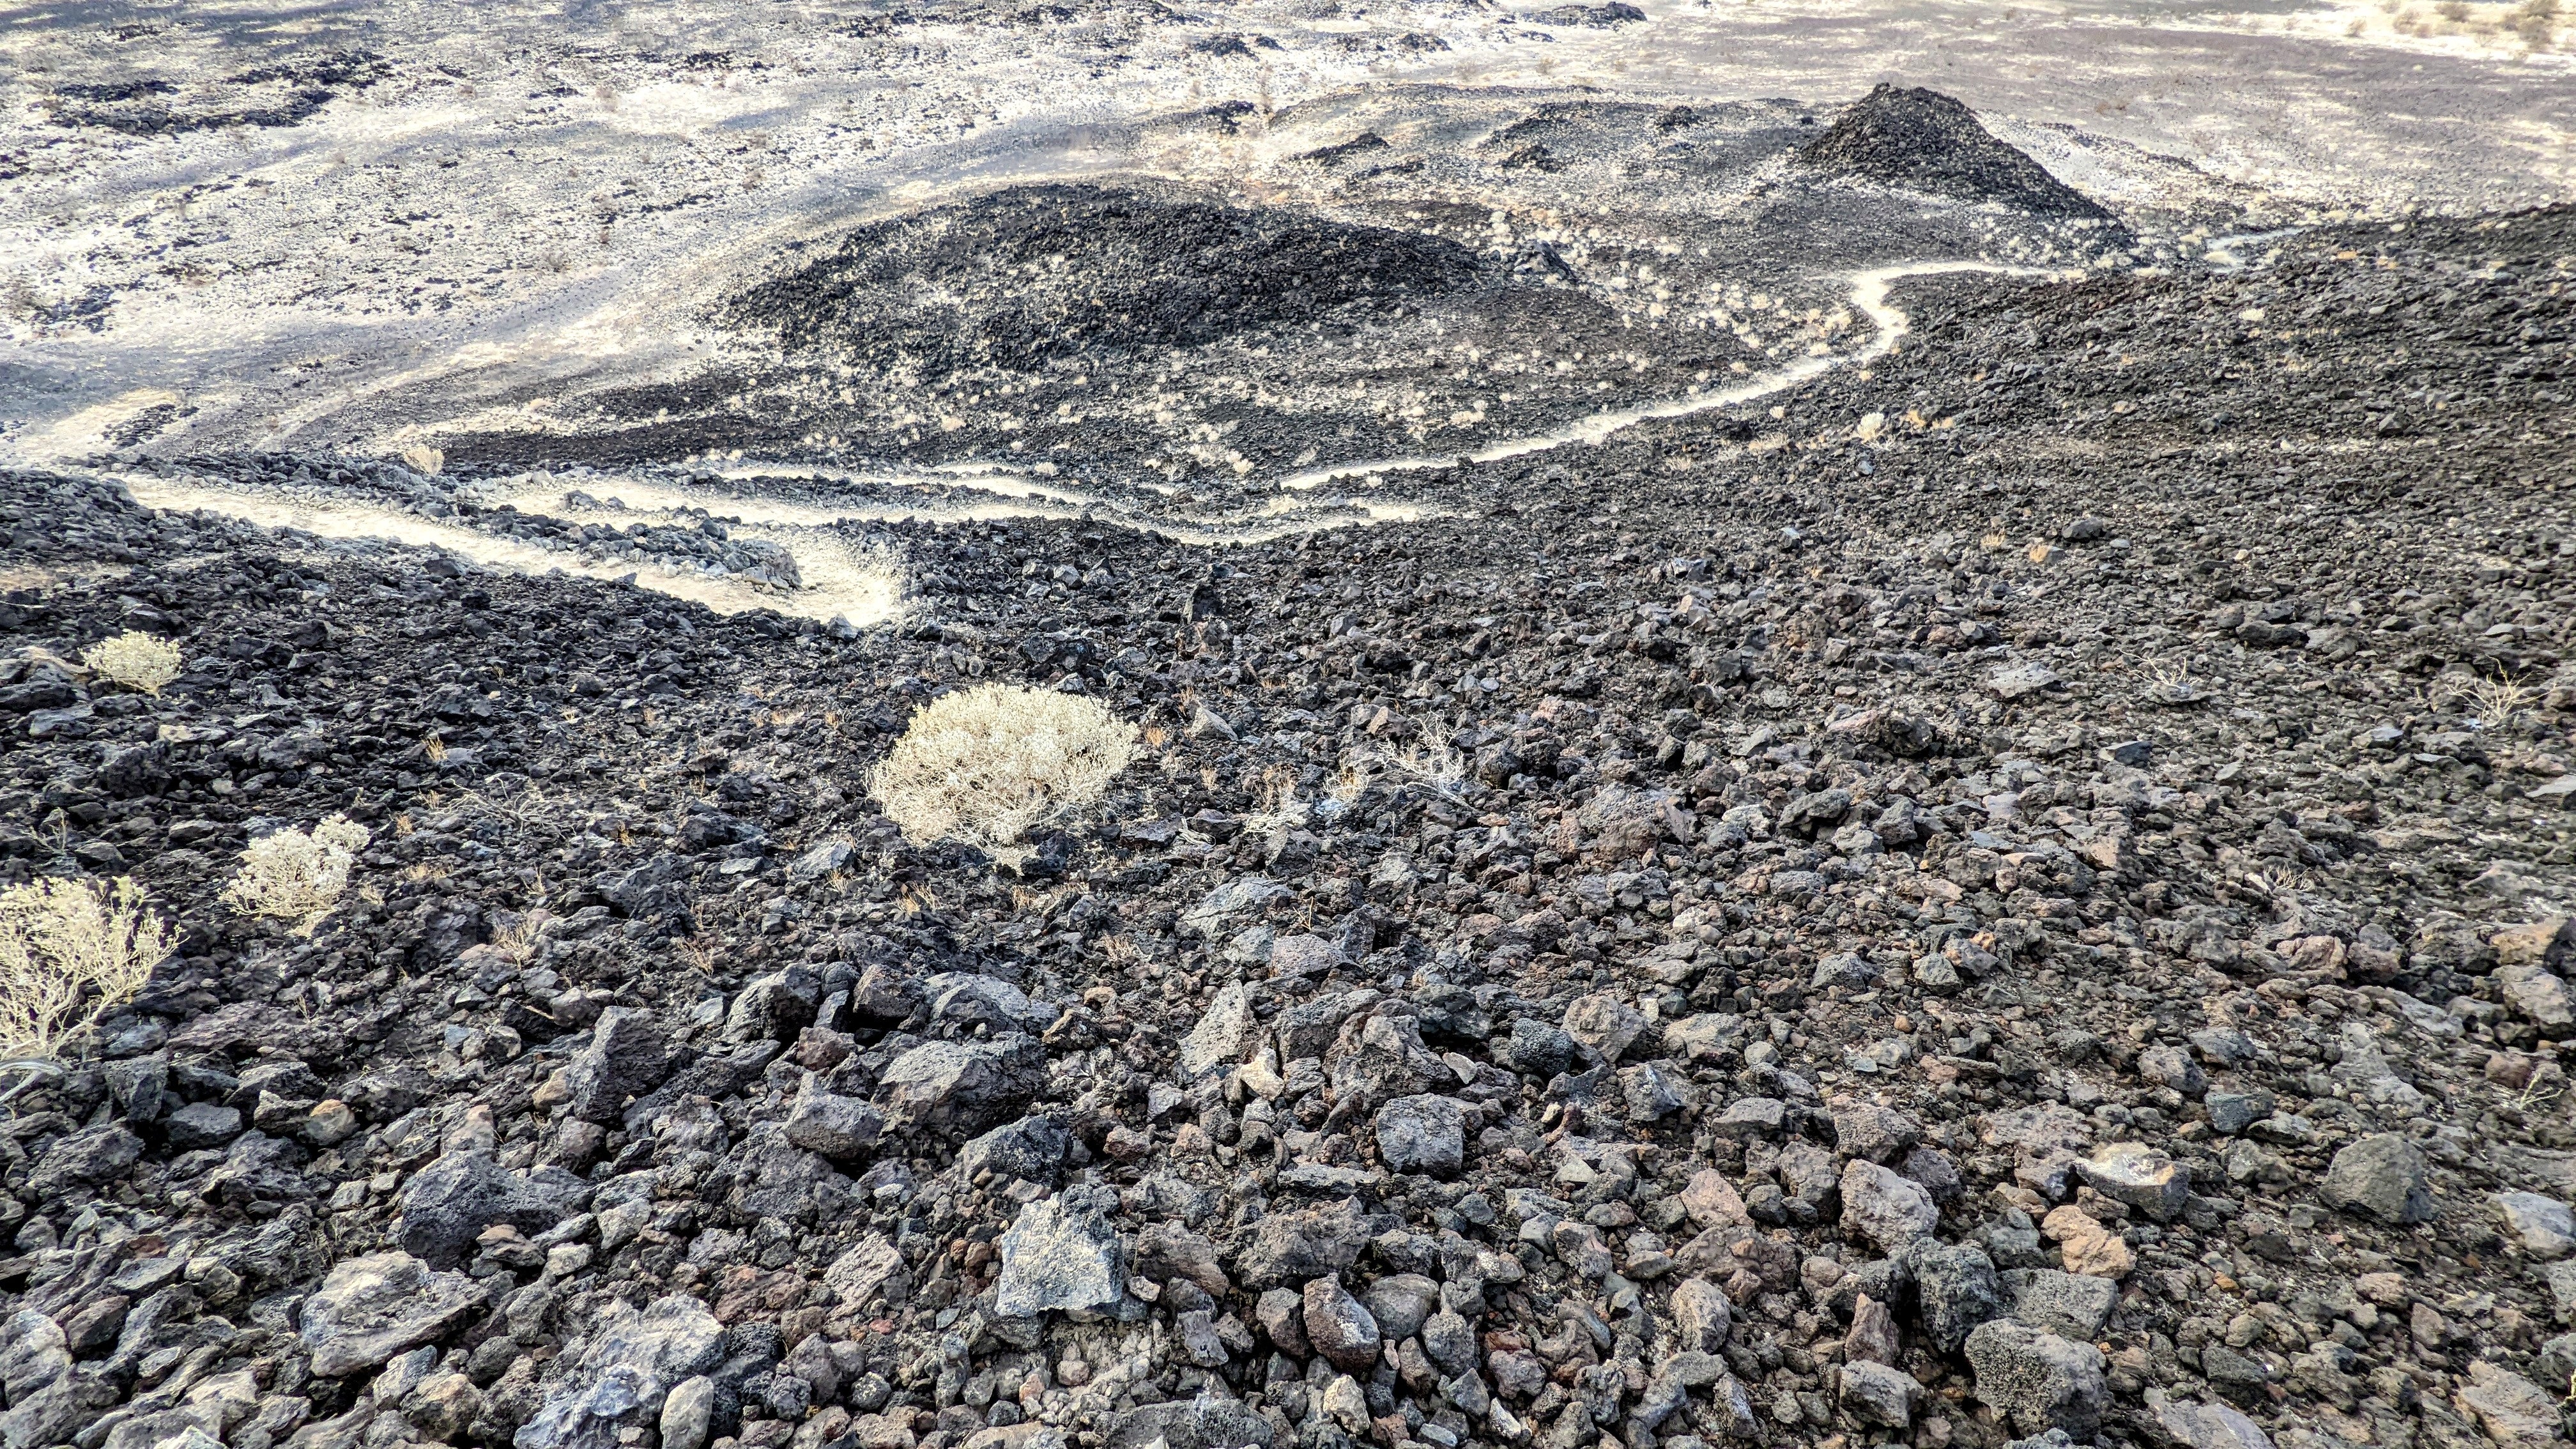 Camper submitted image from Amboy Crater - 5